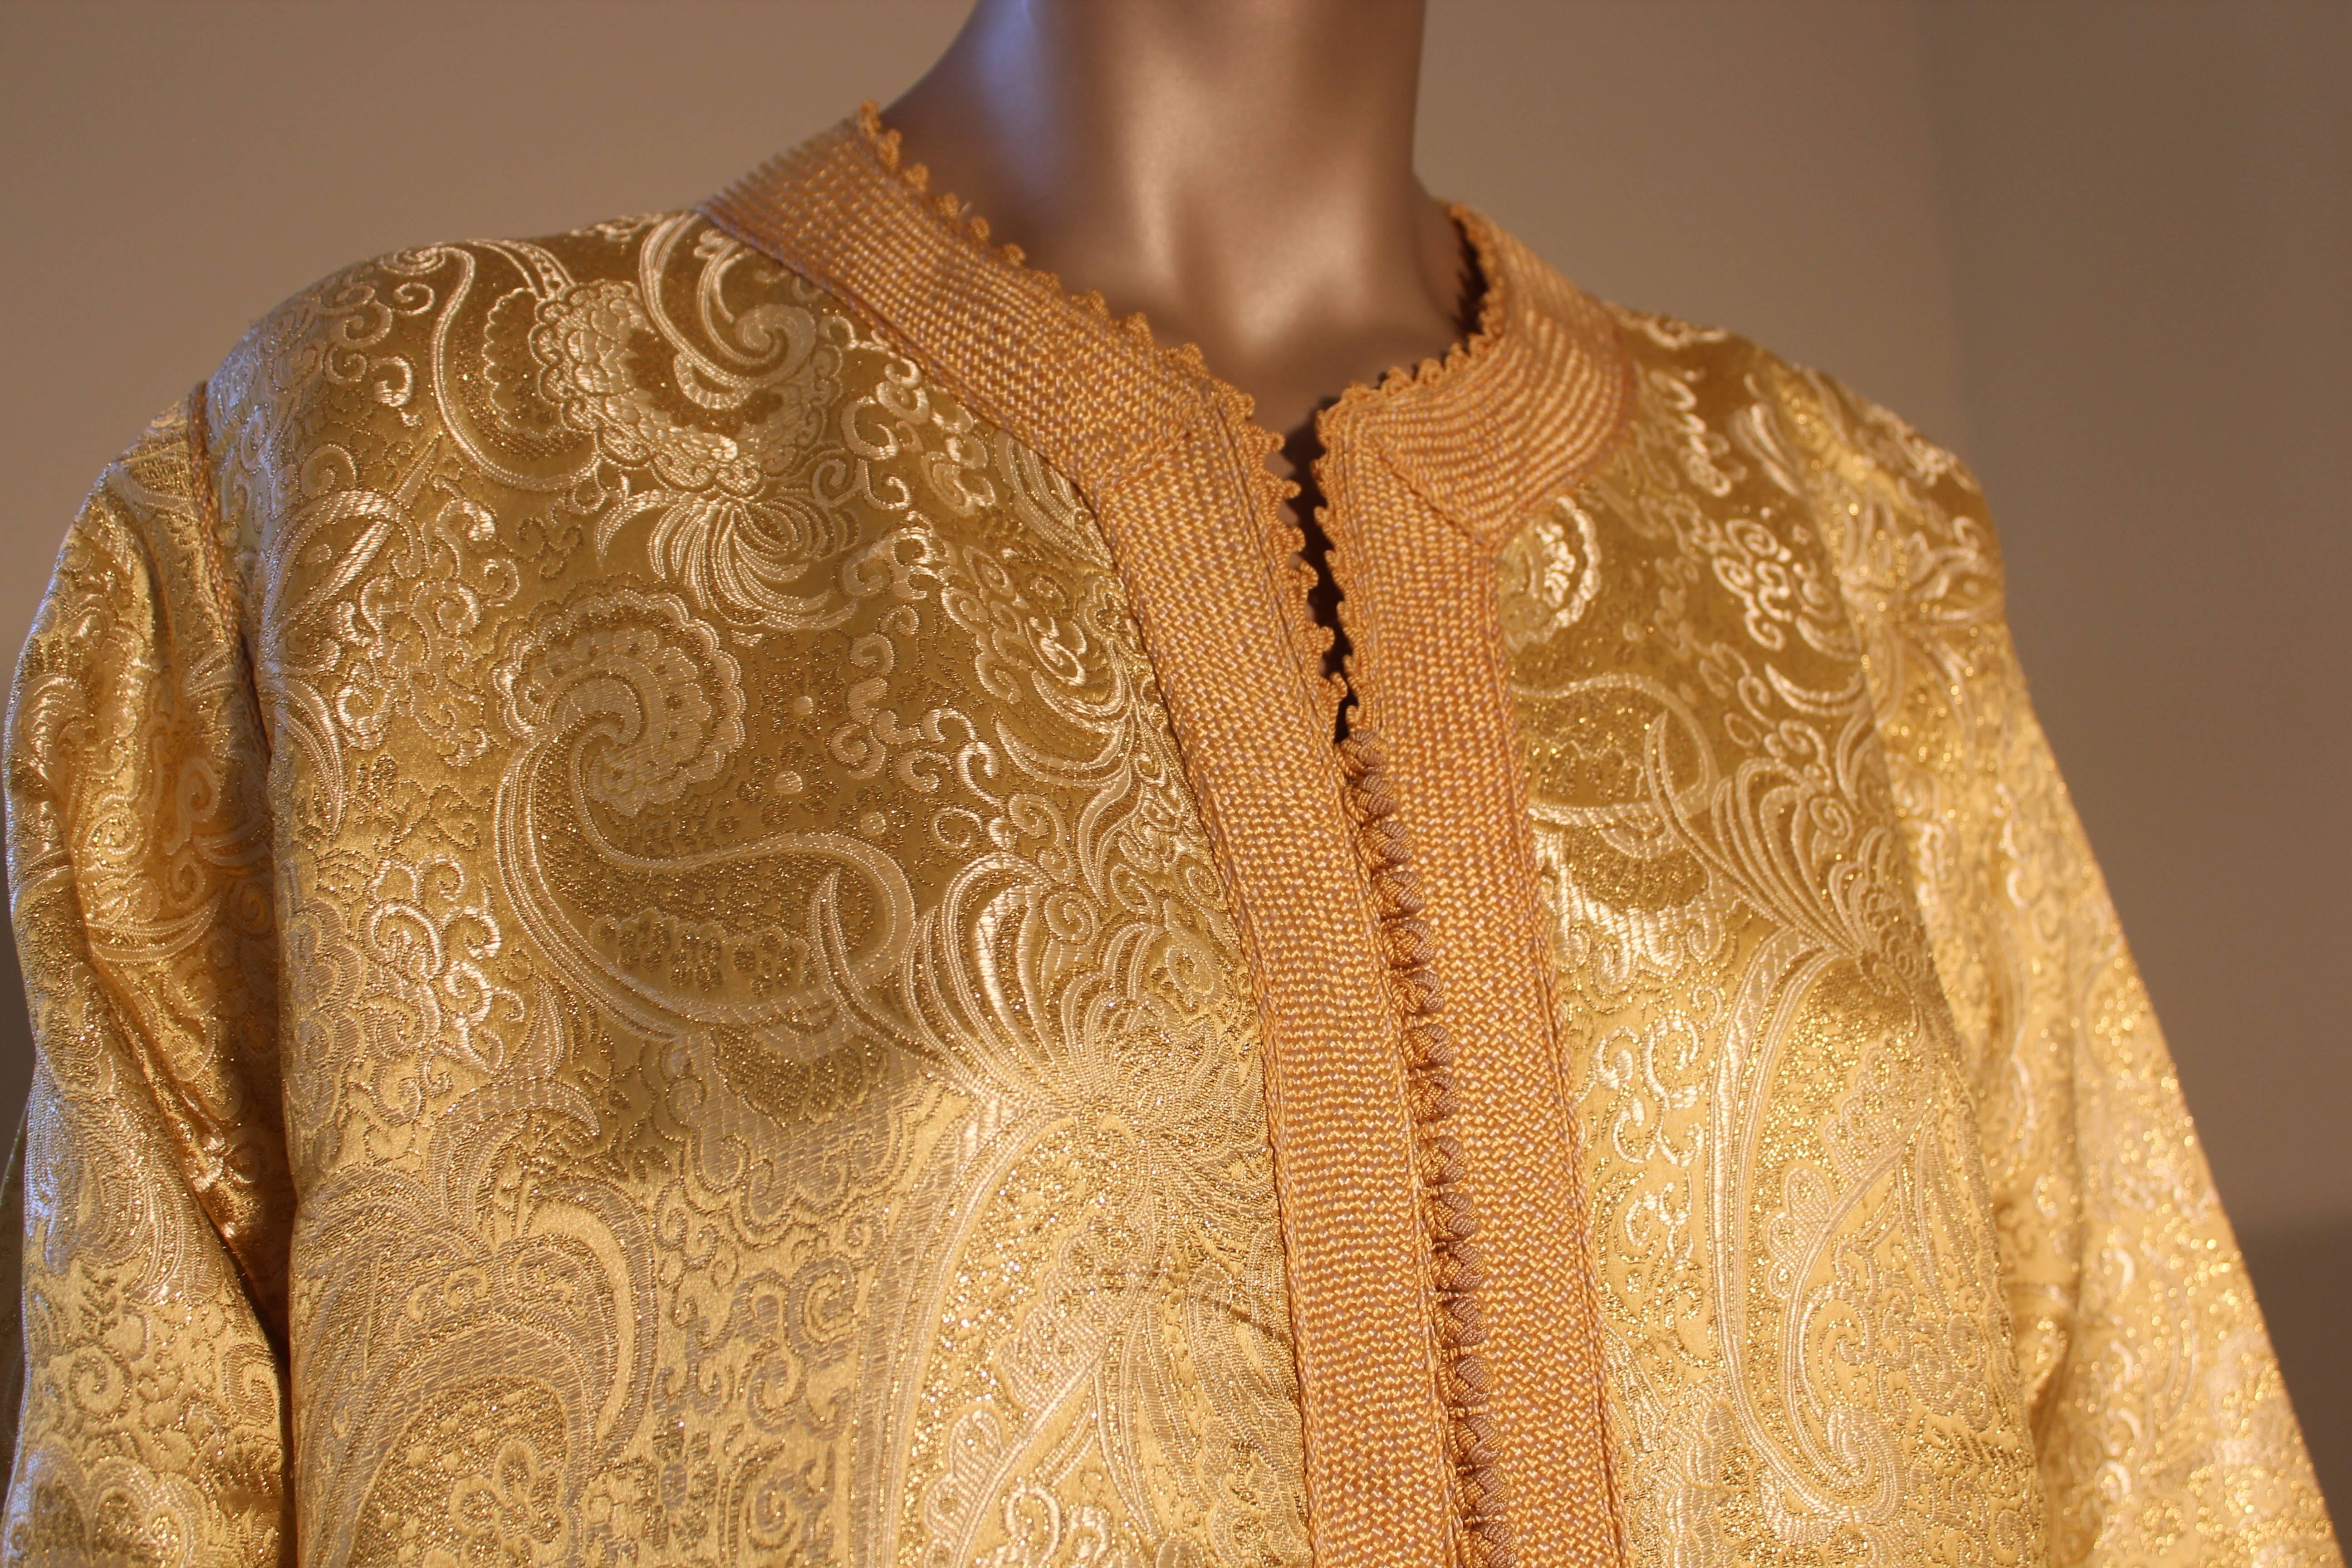 Moroccan vintage exotic gold brocade caftan gown, circa 1970s.
The luxurious kaftan is designed with brilliant gold metallic fabric.
The front of the elegant Kaftan gown is embellished at the front with woven gold buttons and loops that run down the